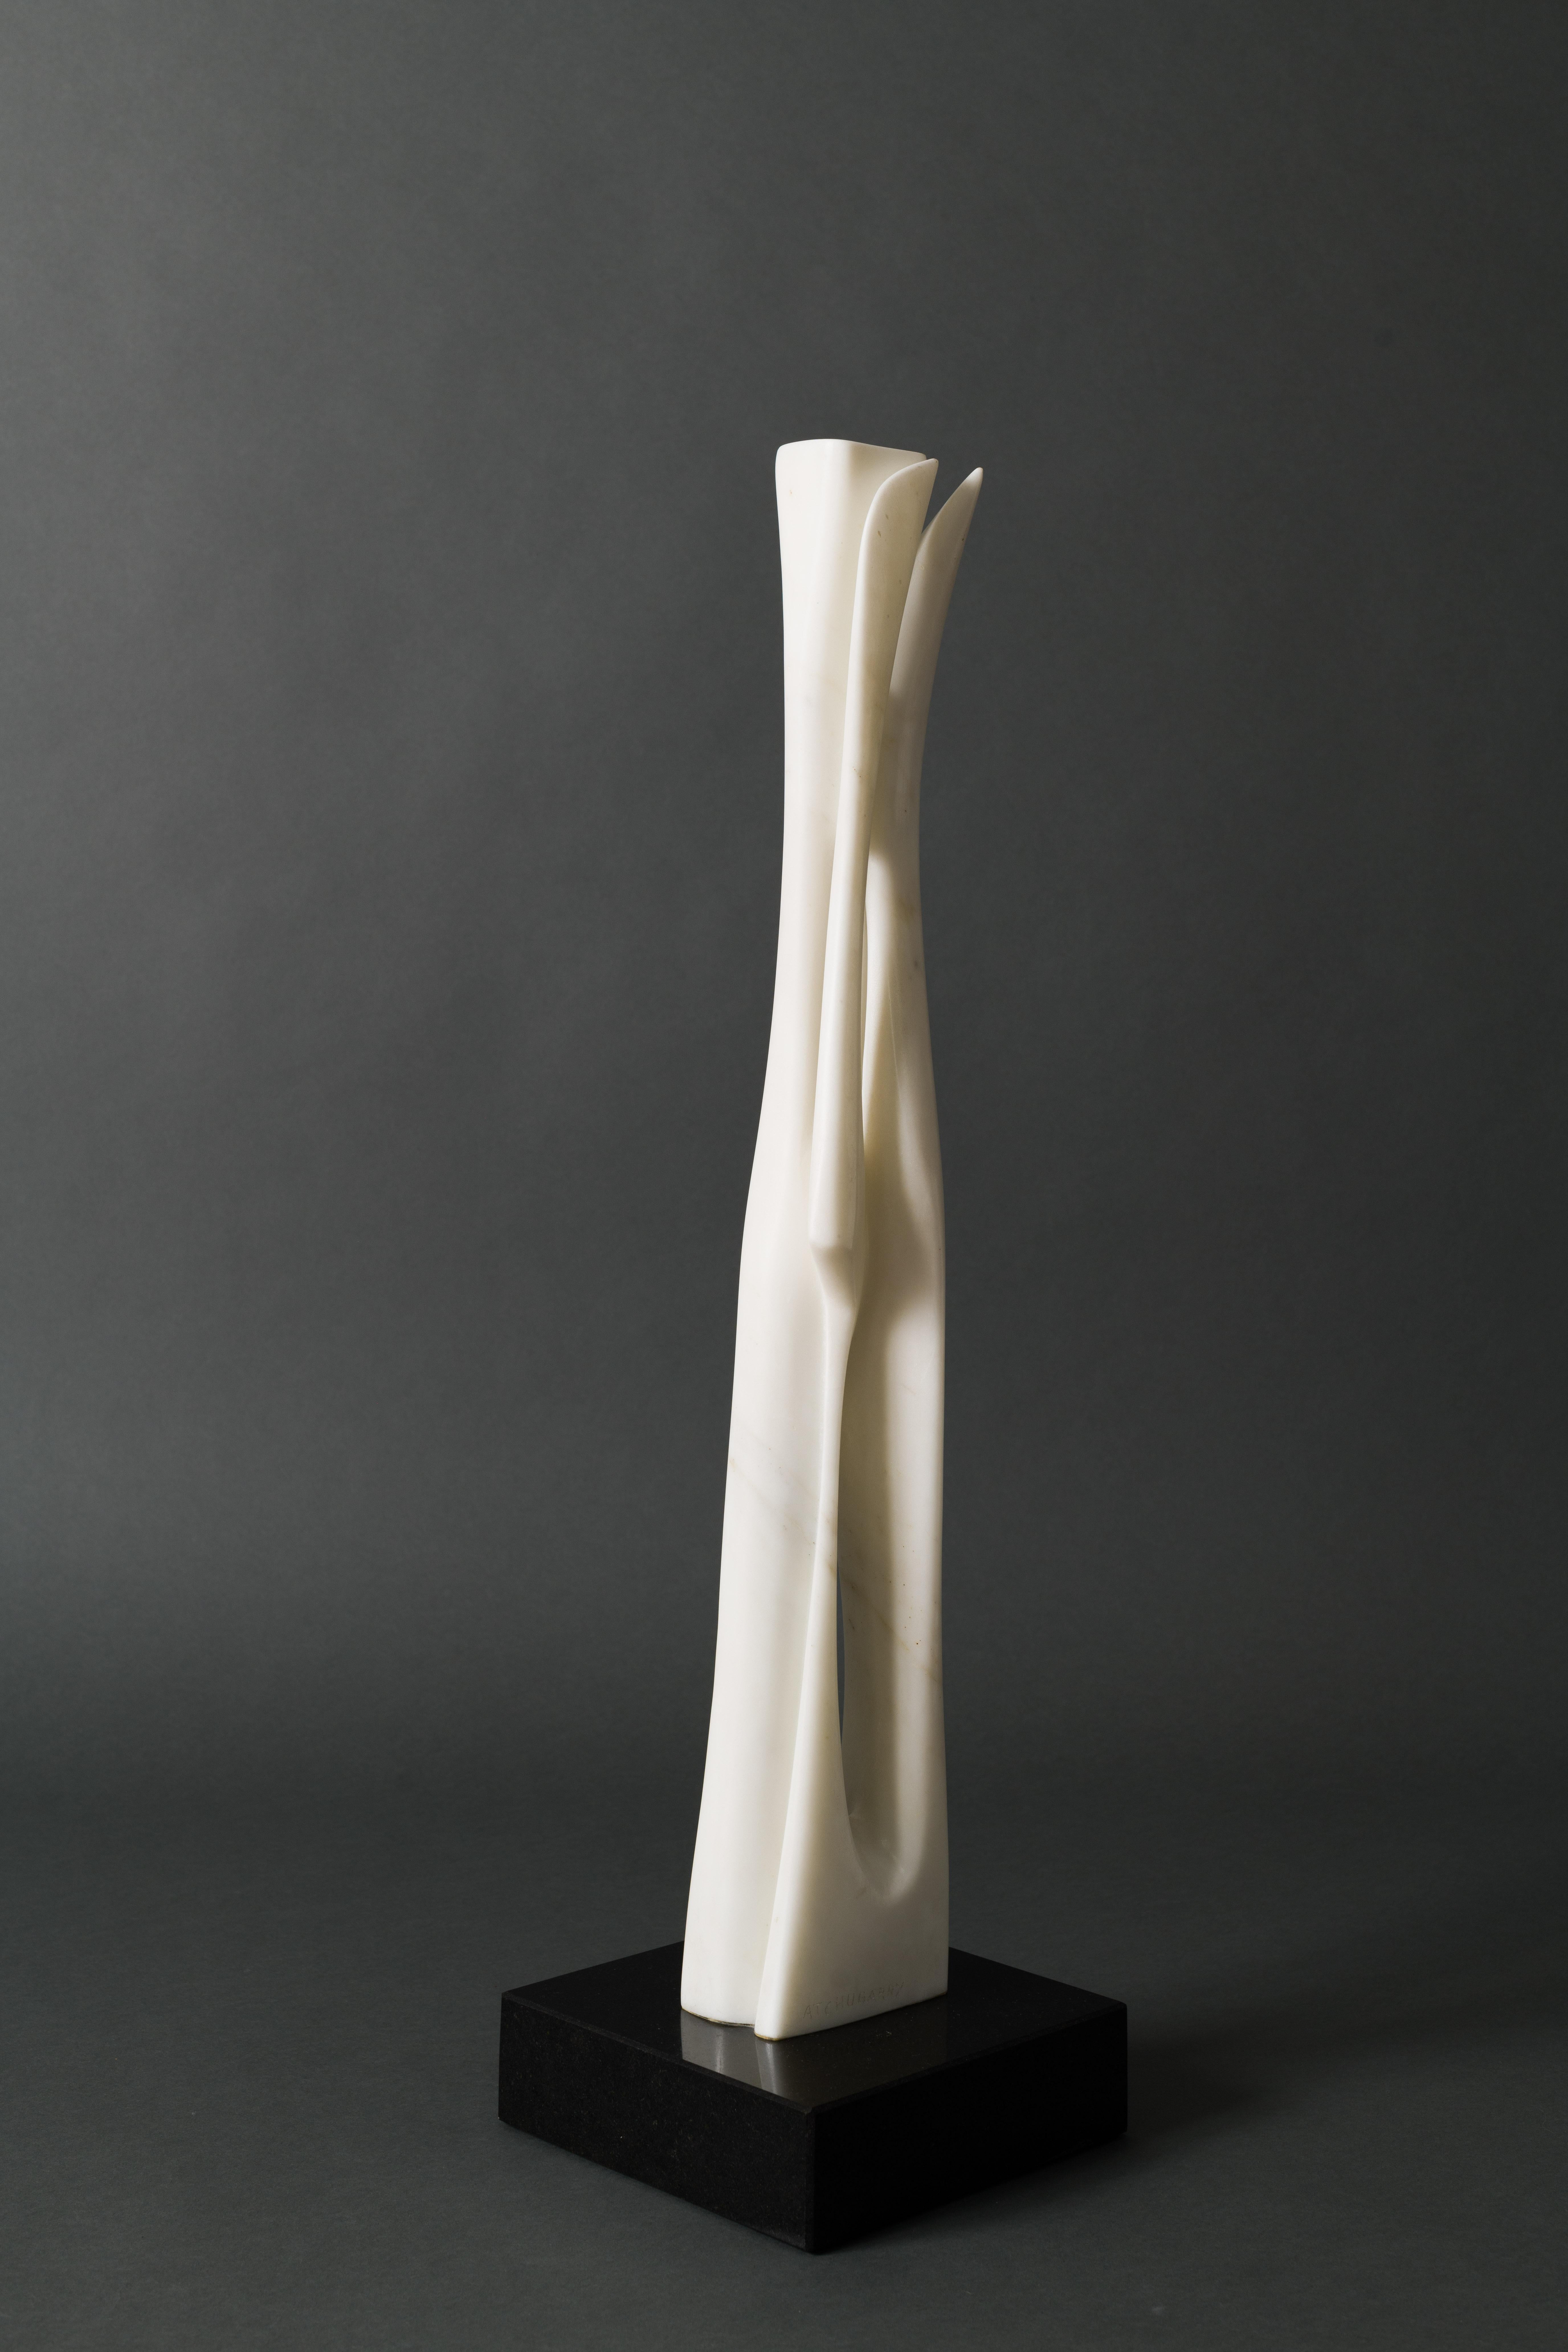 Carrara marble architectural carved Atchugarry sculpture - Black Abstract Sculpture by Pablo Atchugarry